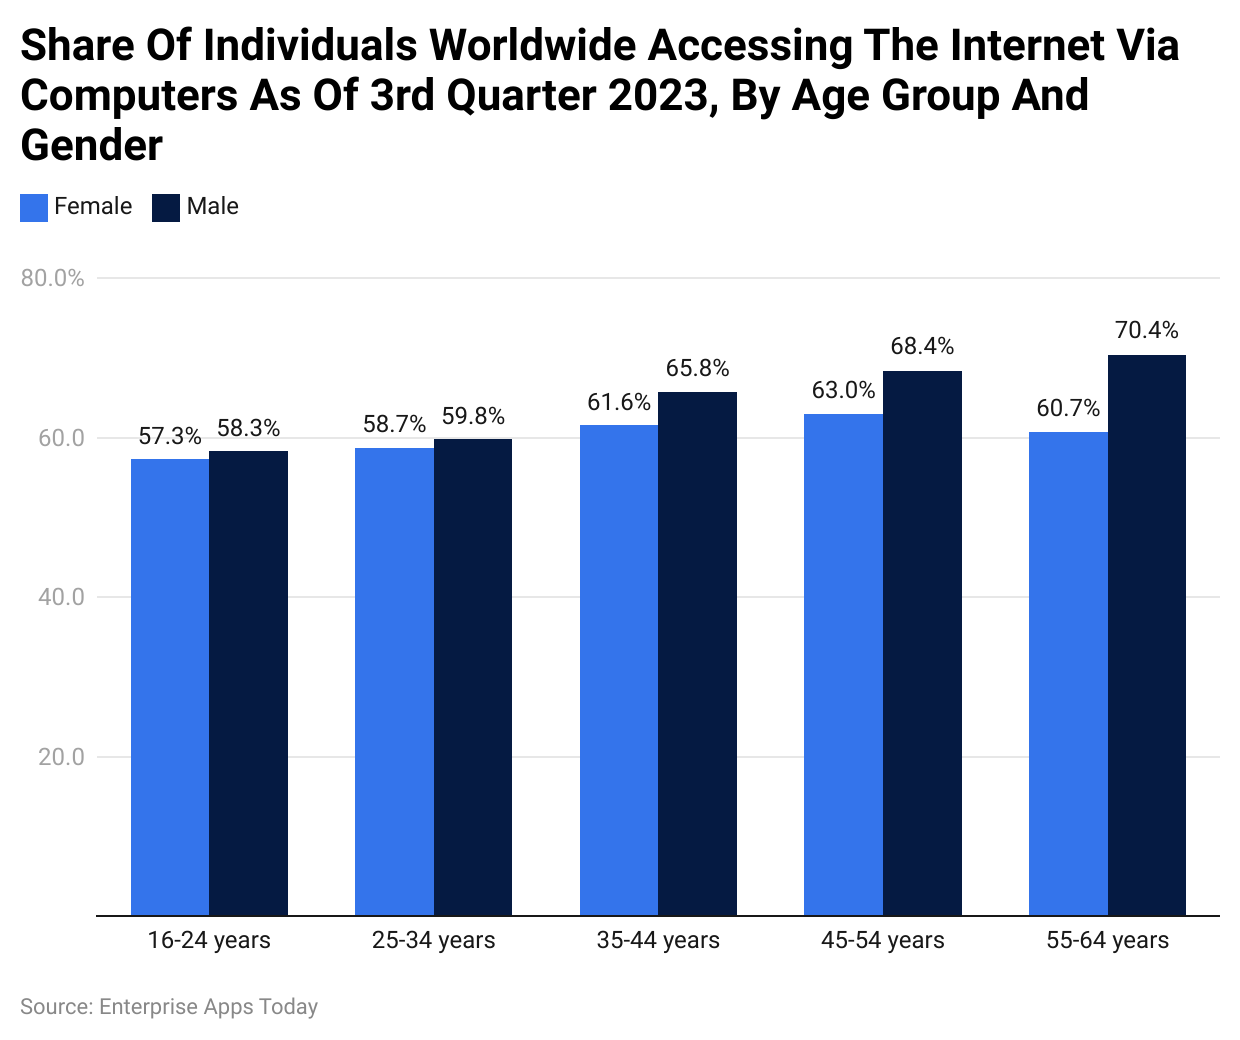 Share Of Individuals Worldwide Accessing The Internet Via Computers As Of 3rd Quarter 2023, By Age Group And Gender